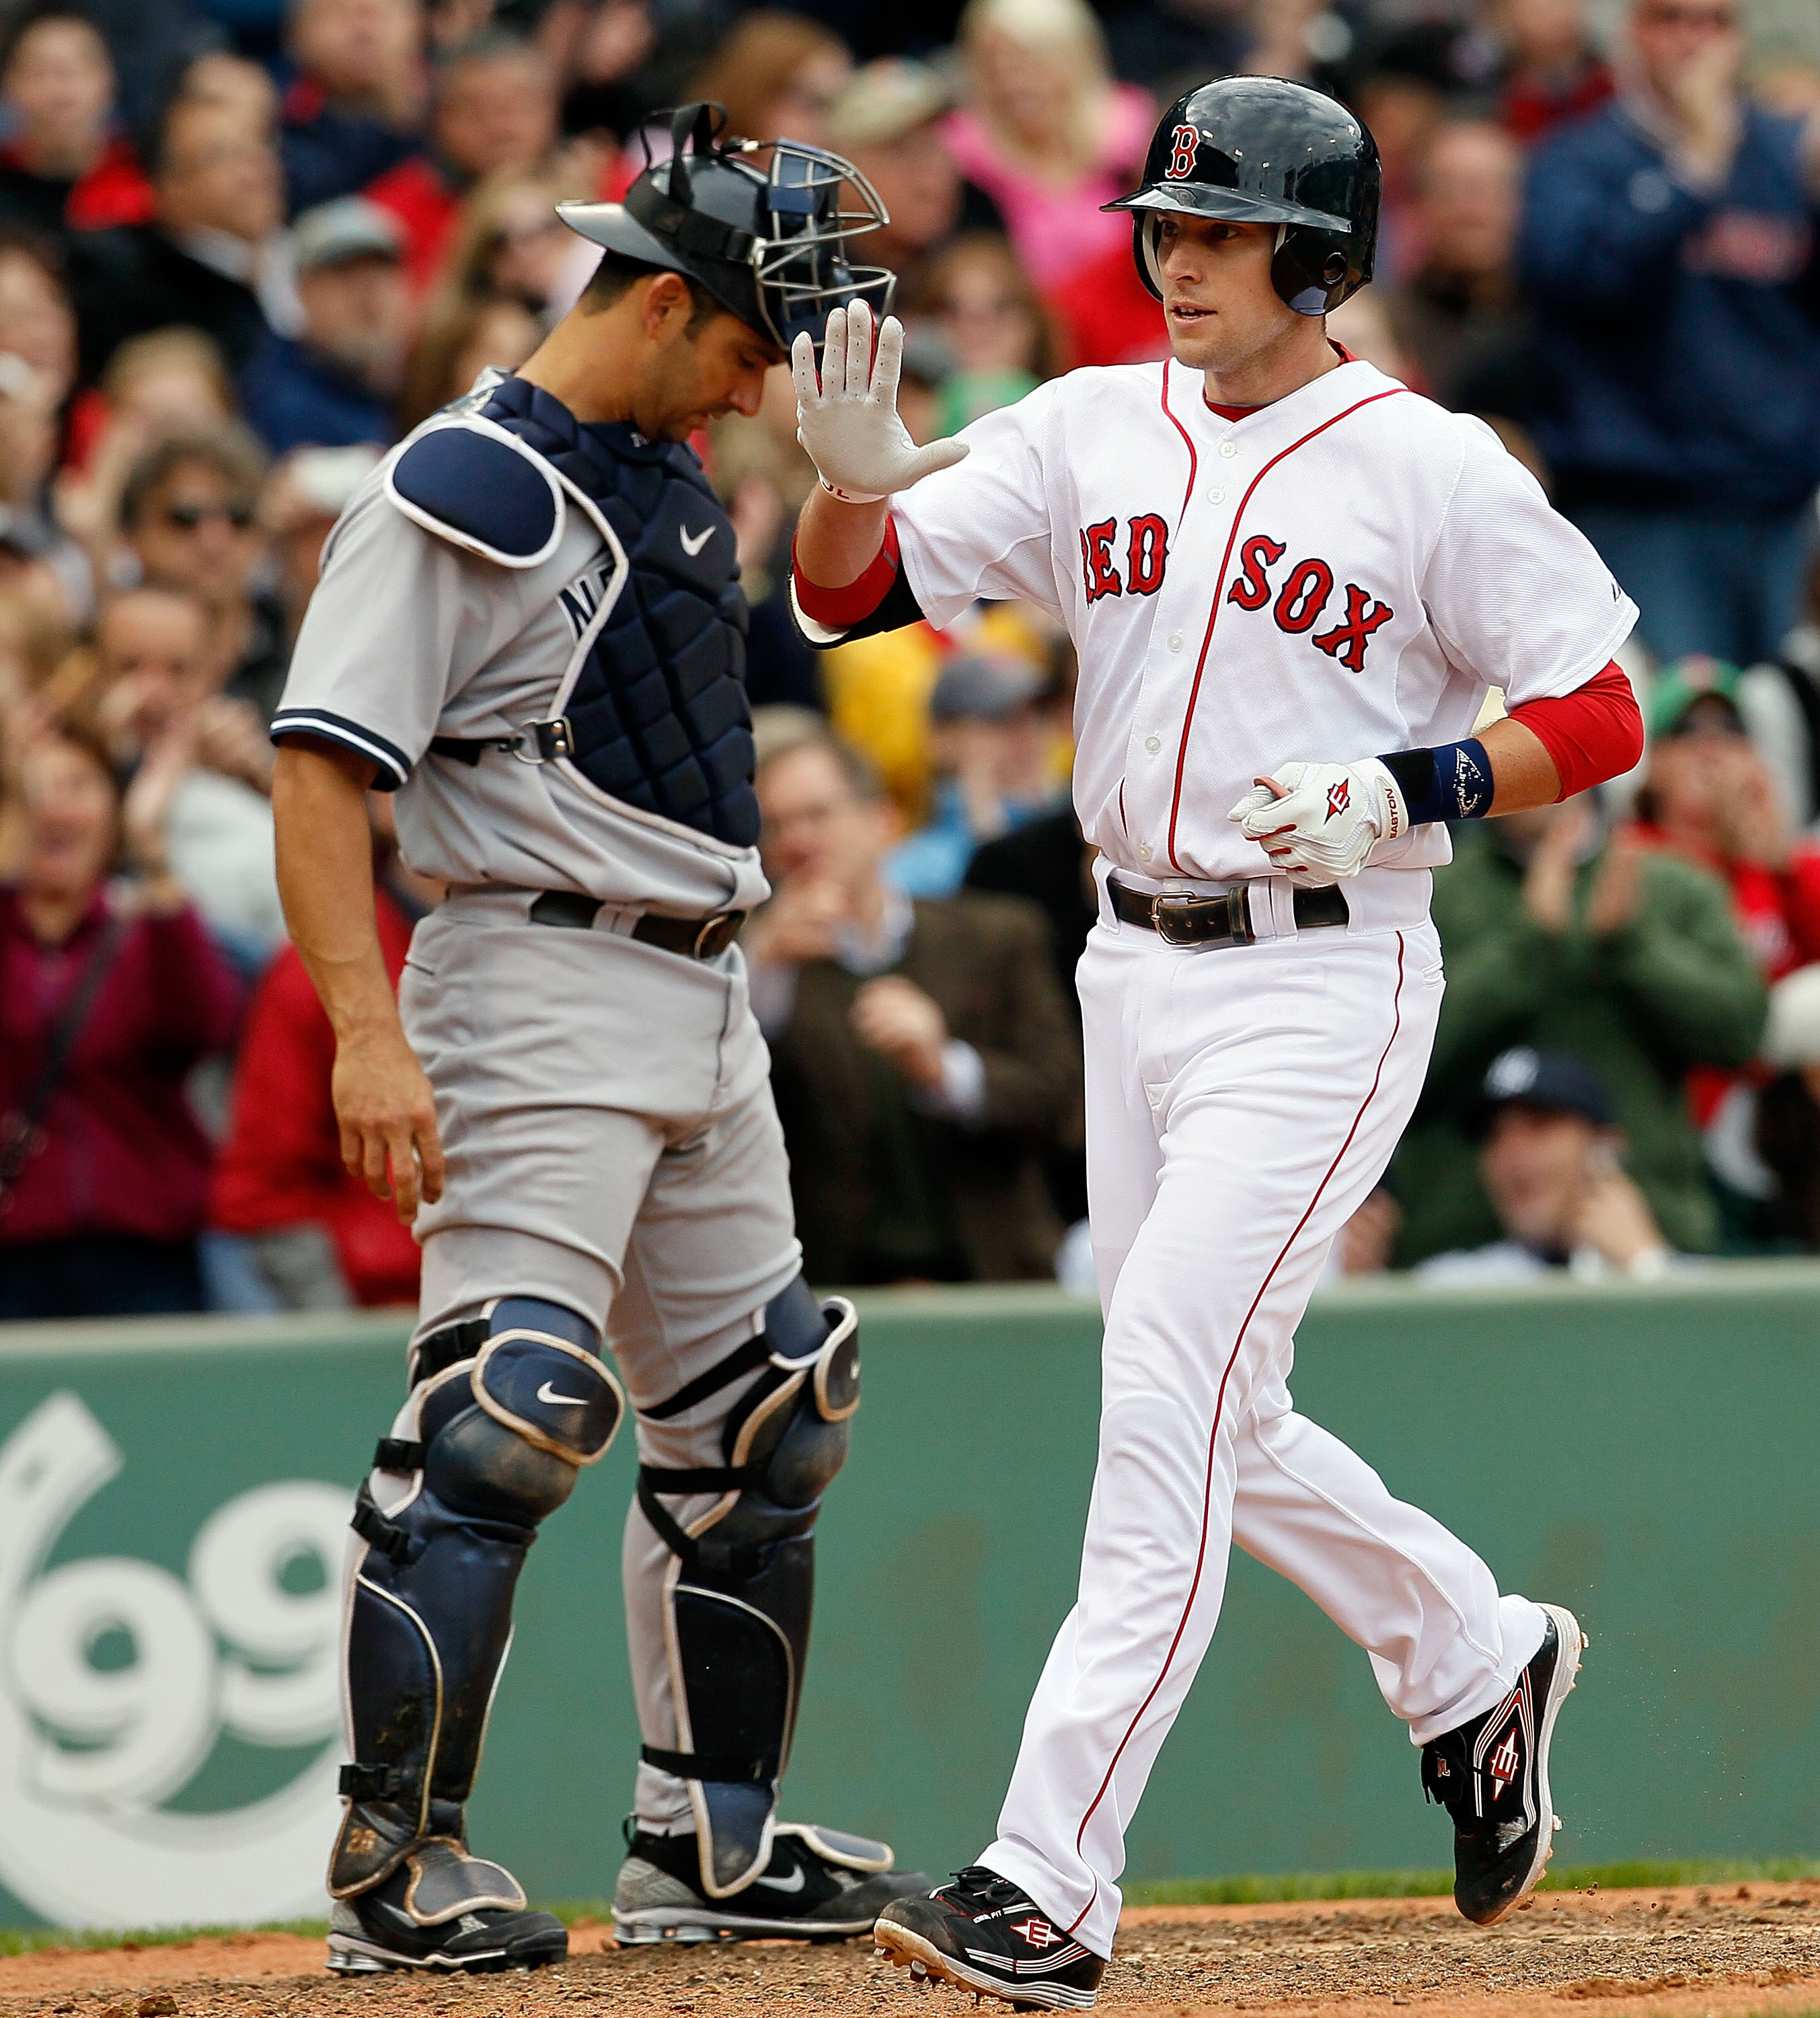 Matsuzaka Helps Red Sox Take A.L.C.S. Opener - The New York Times